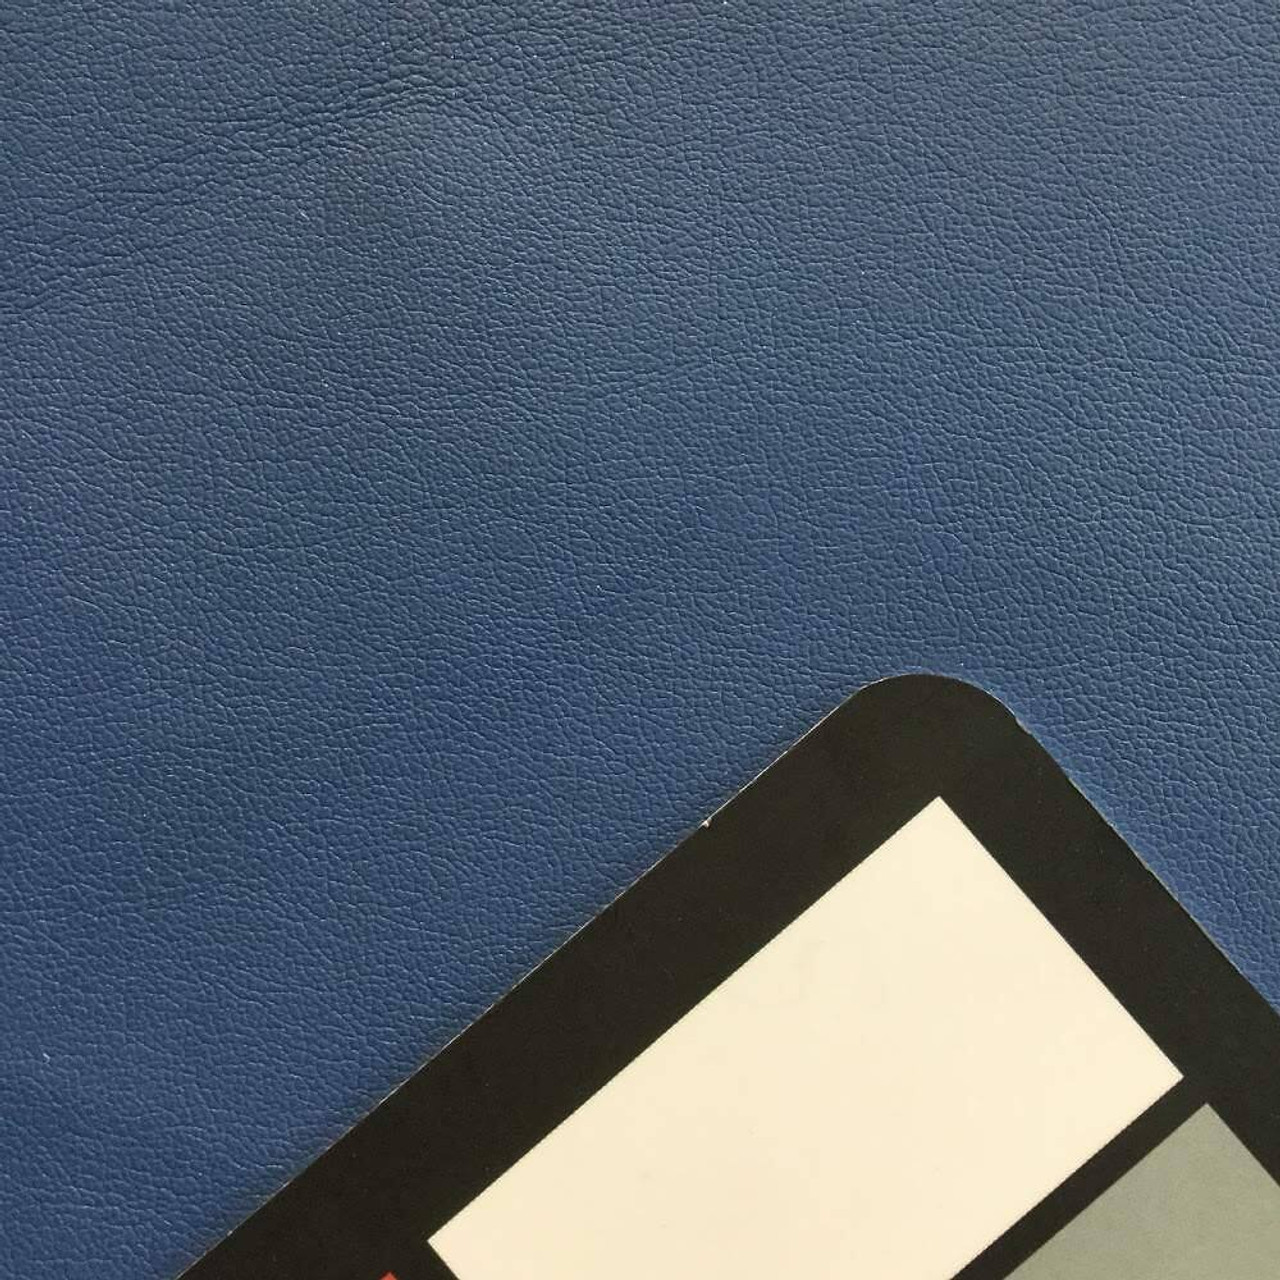 5 Yards 54 Wide Vinyl Fabric Thick Marine Grade Faux Leather Fabric Heavy  Duty PU Leather Fabric Cotton Back Home Decor Fabric for Hand Crafts DIY